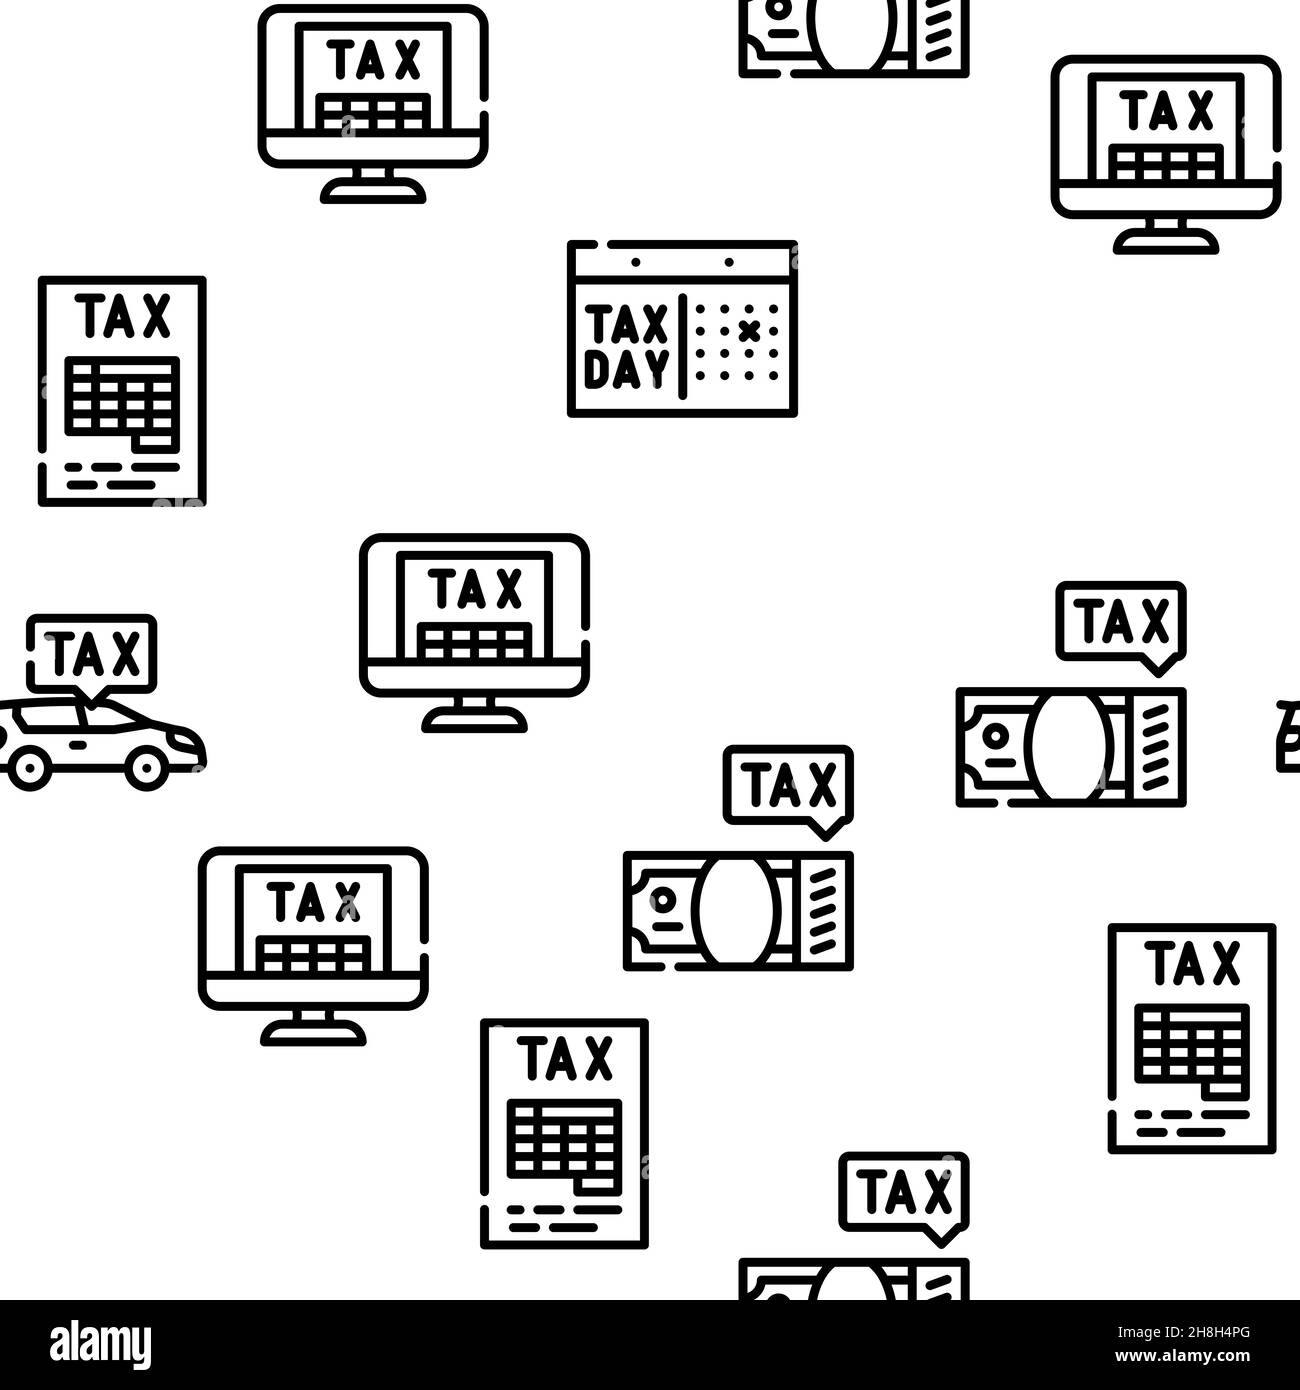 Tax Financial Payment For Income Vector Seamless Pattern Stock Vector